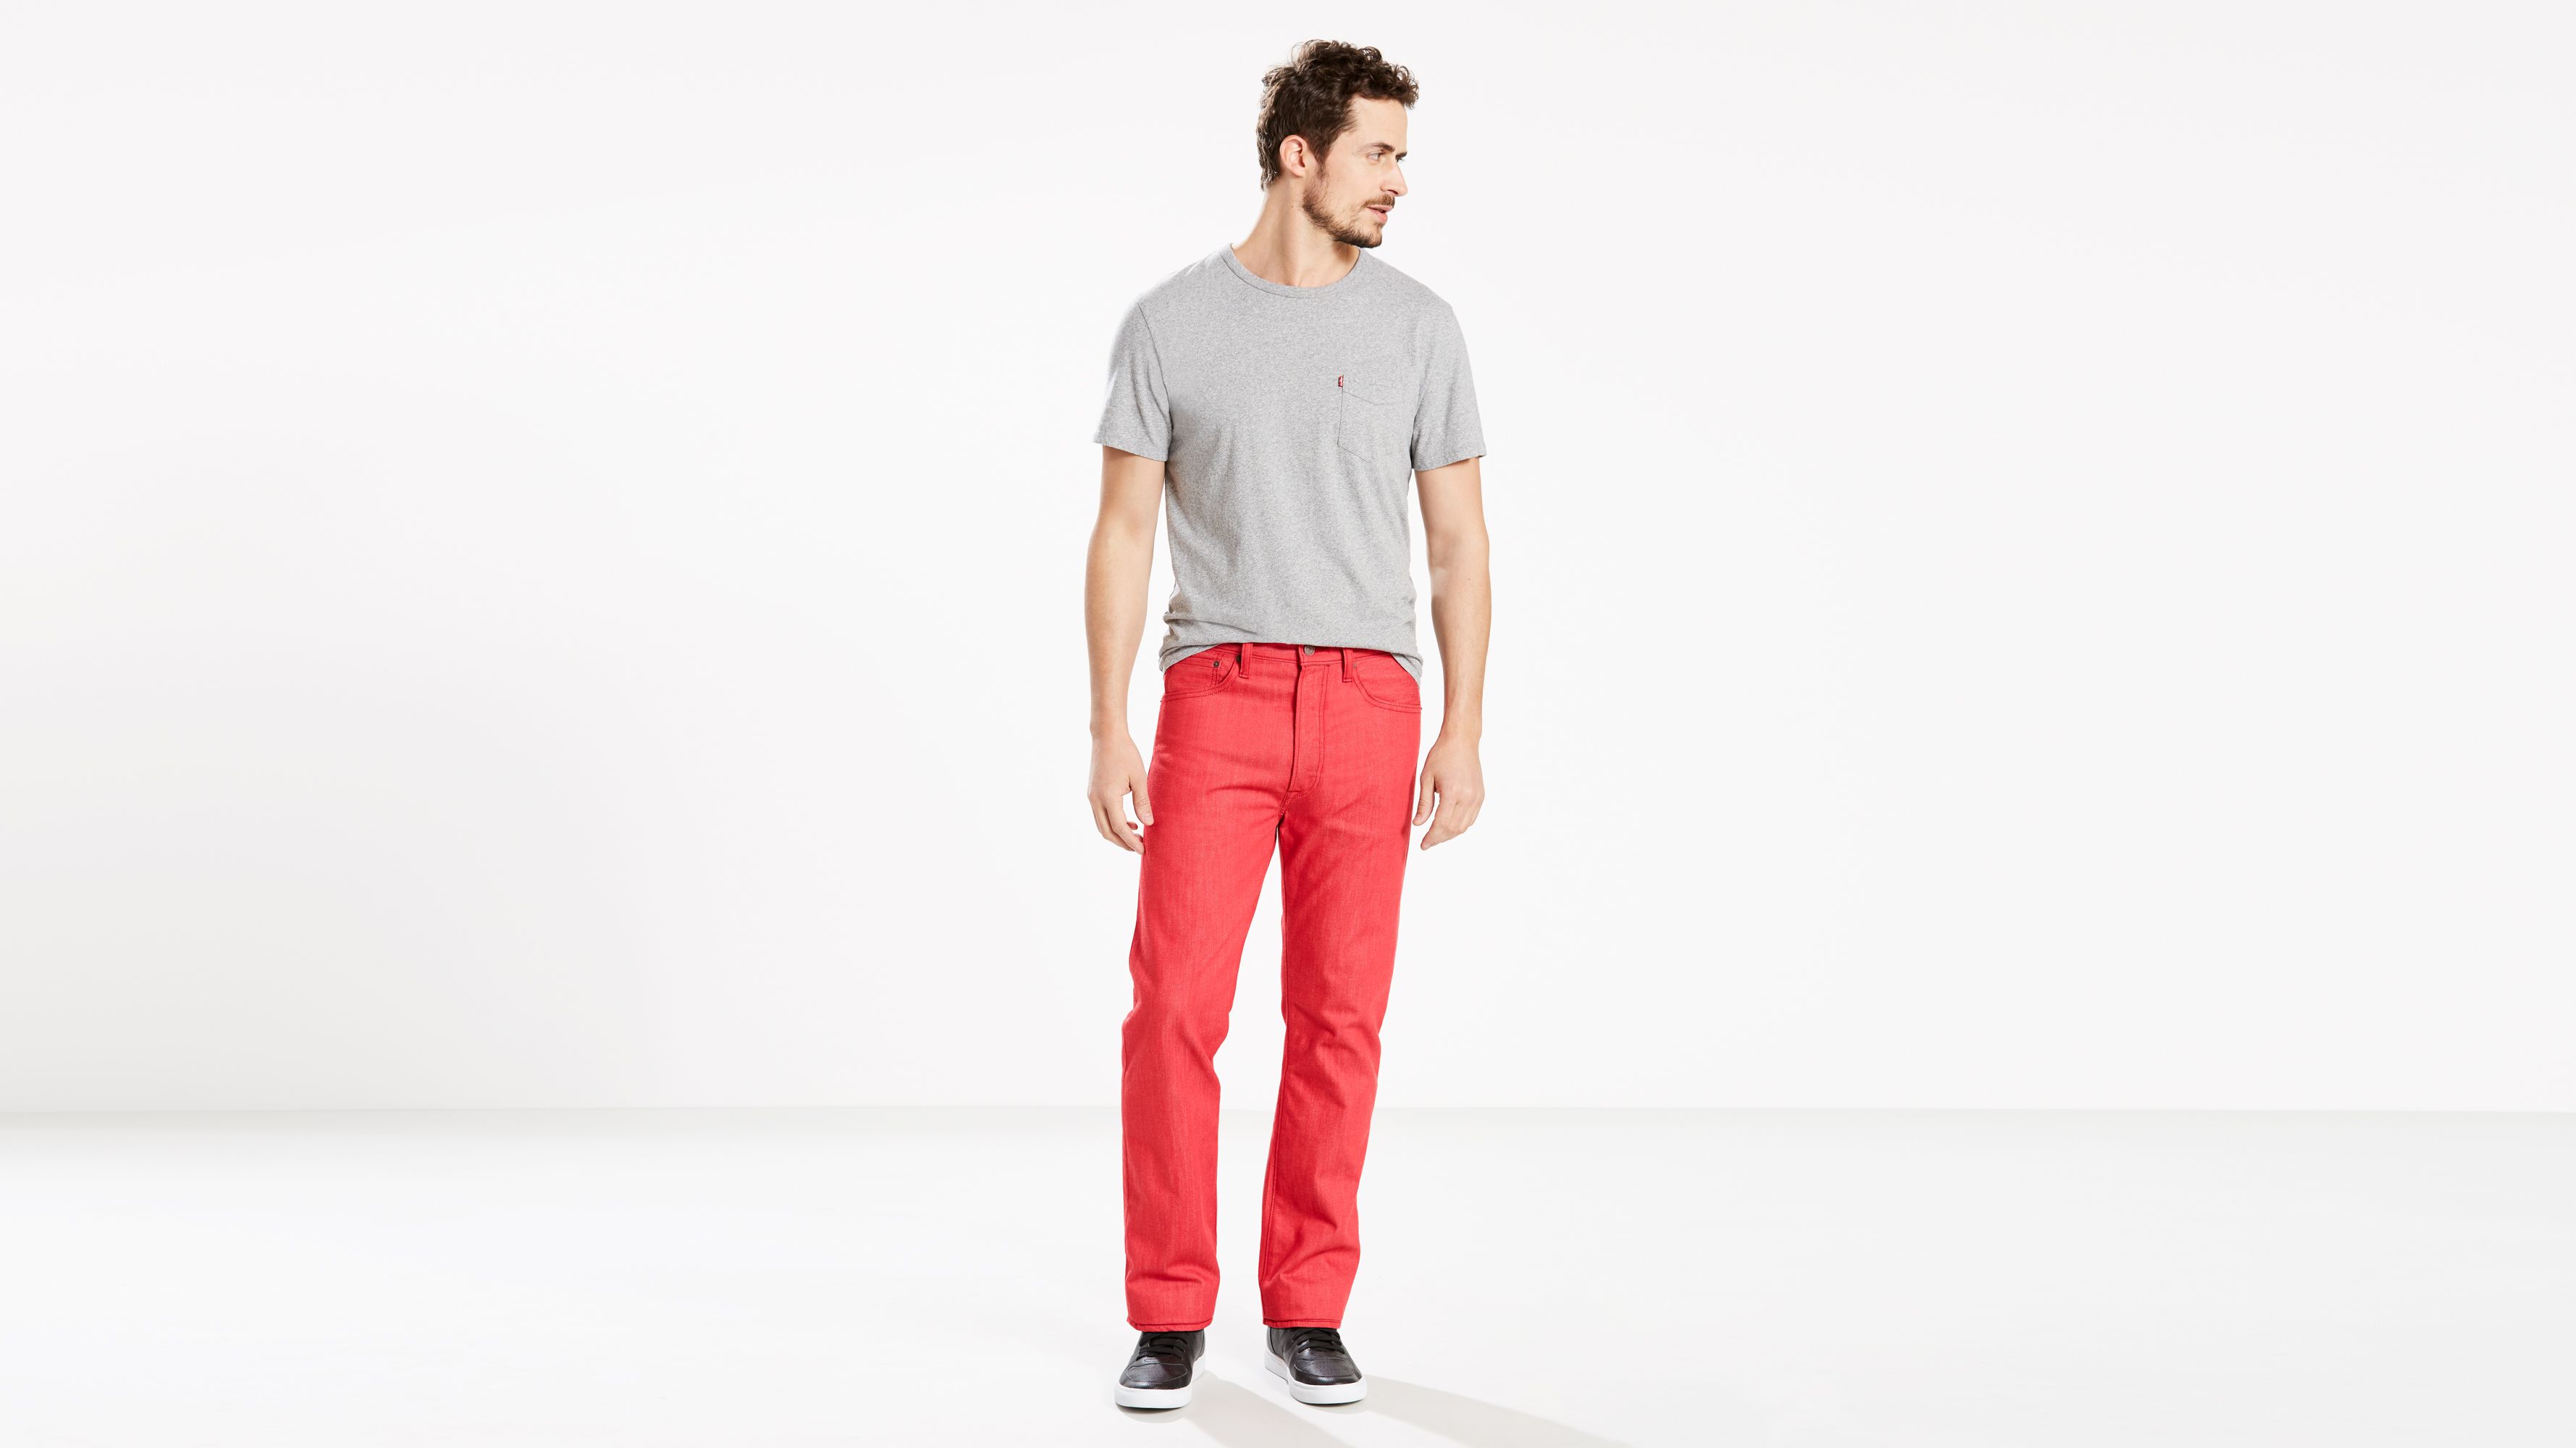 red levi jeans 501